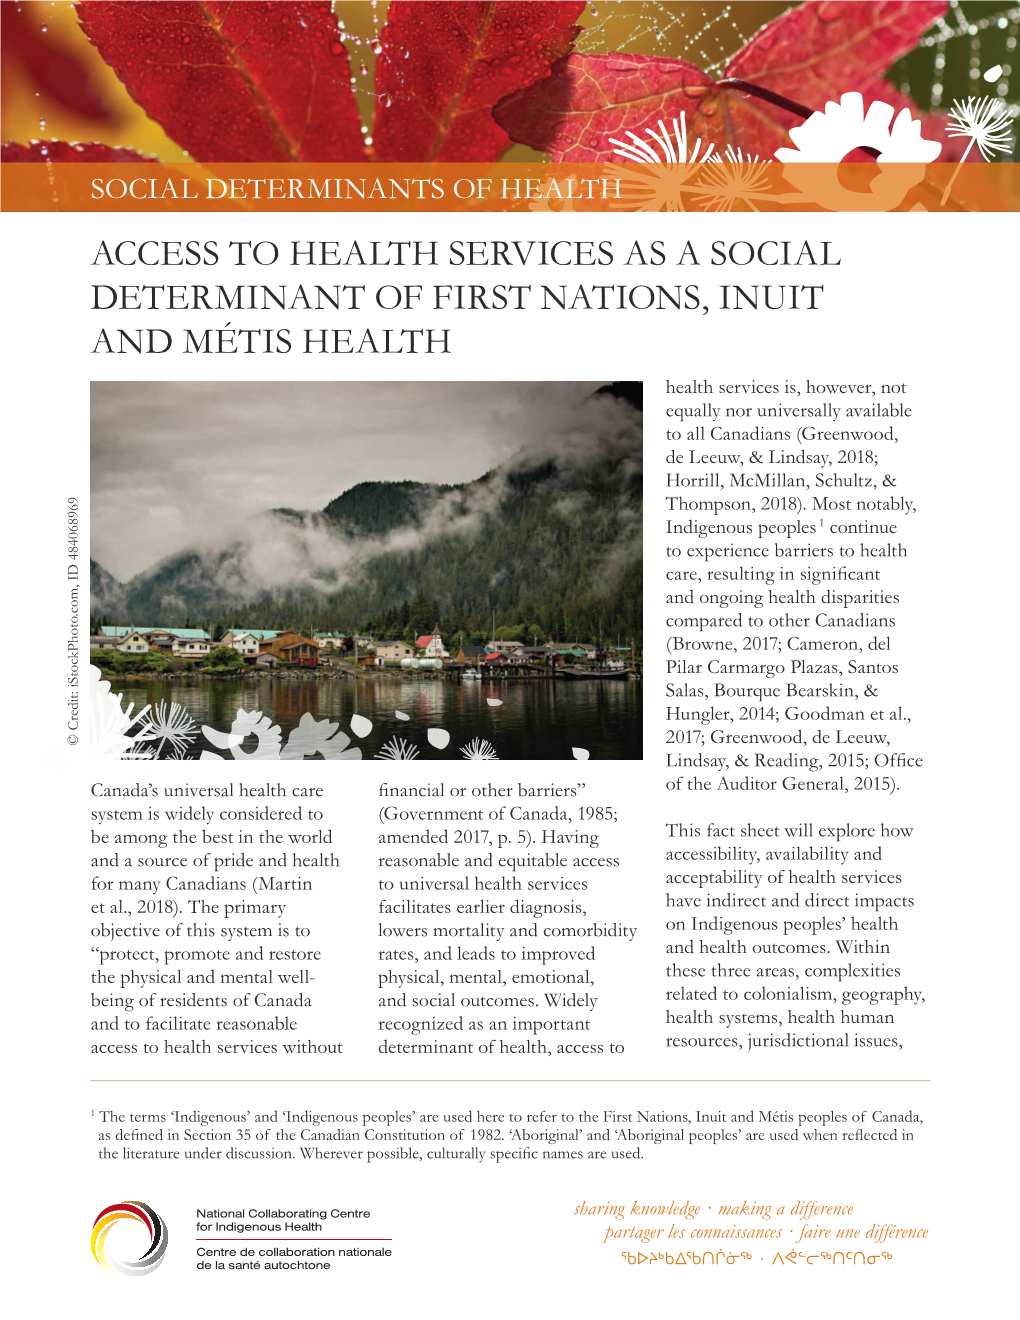 Access to Health Services As a Social Determinant of First Nations, Inuit